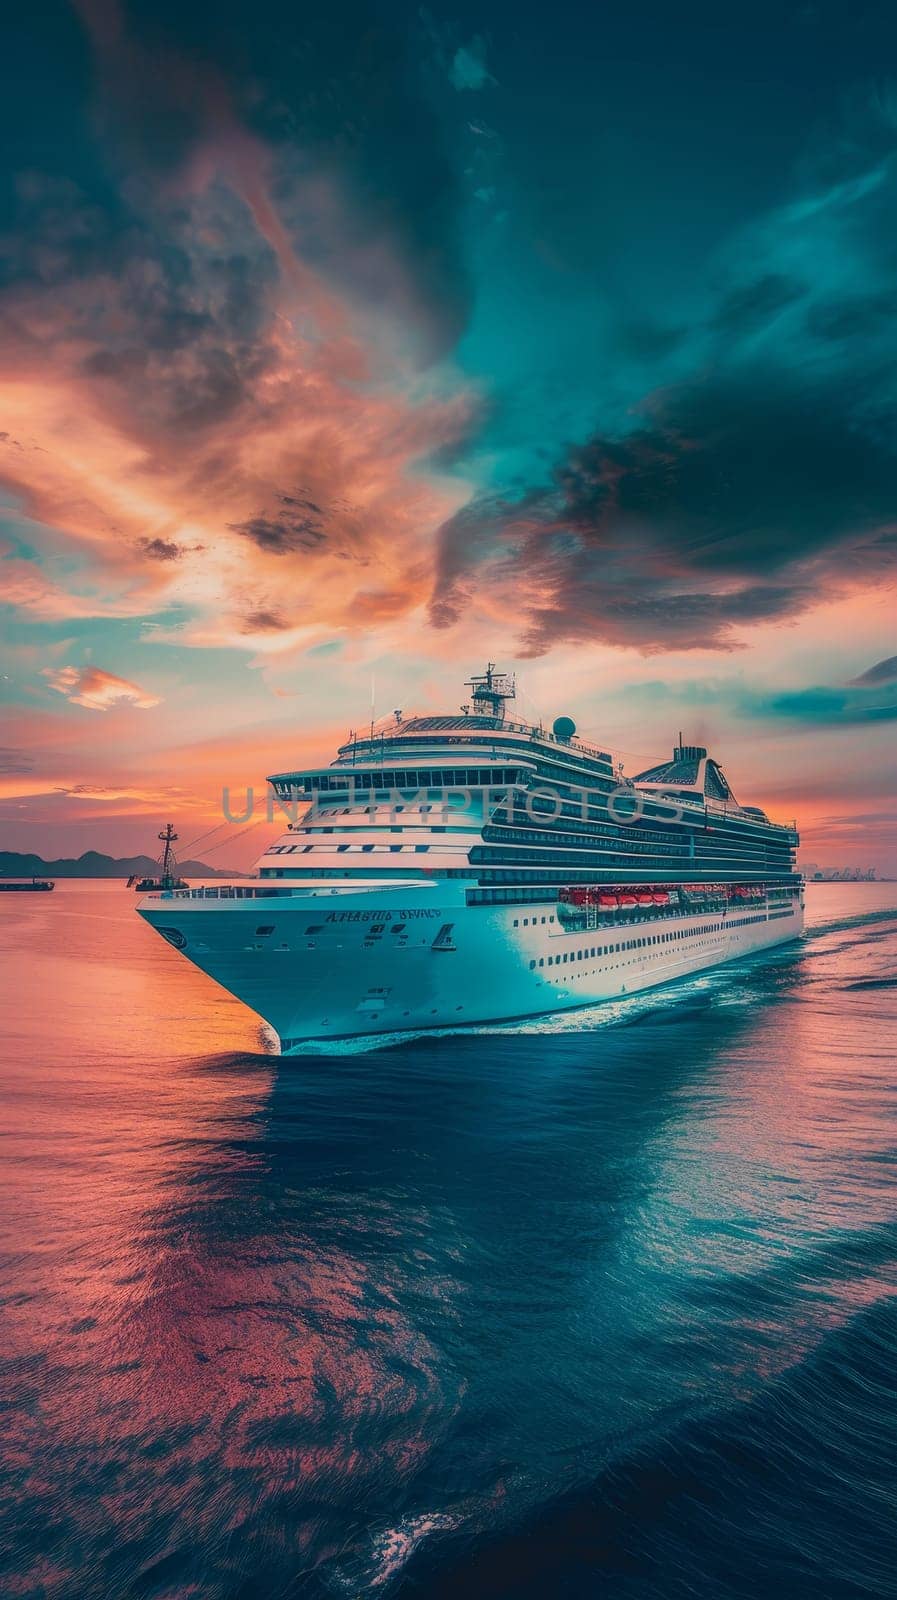 A luxury cruise ship sails through calm waters against a breathtaking sunset sky, offering a sense of grand travel adventures. by sfinks